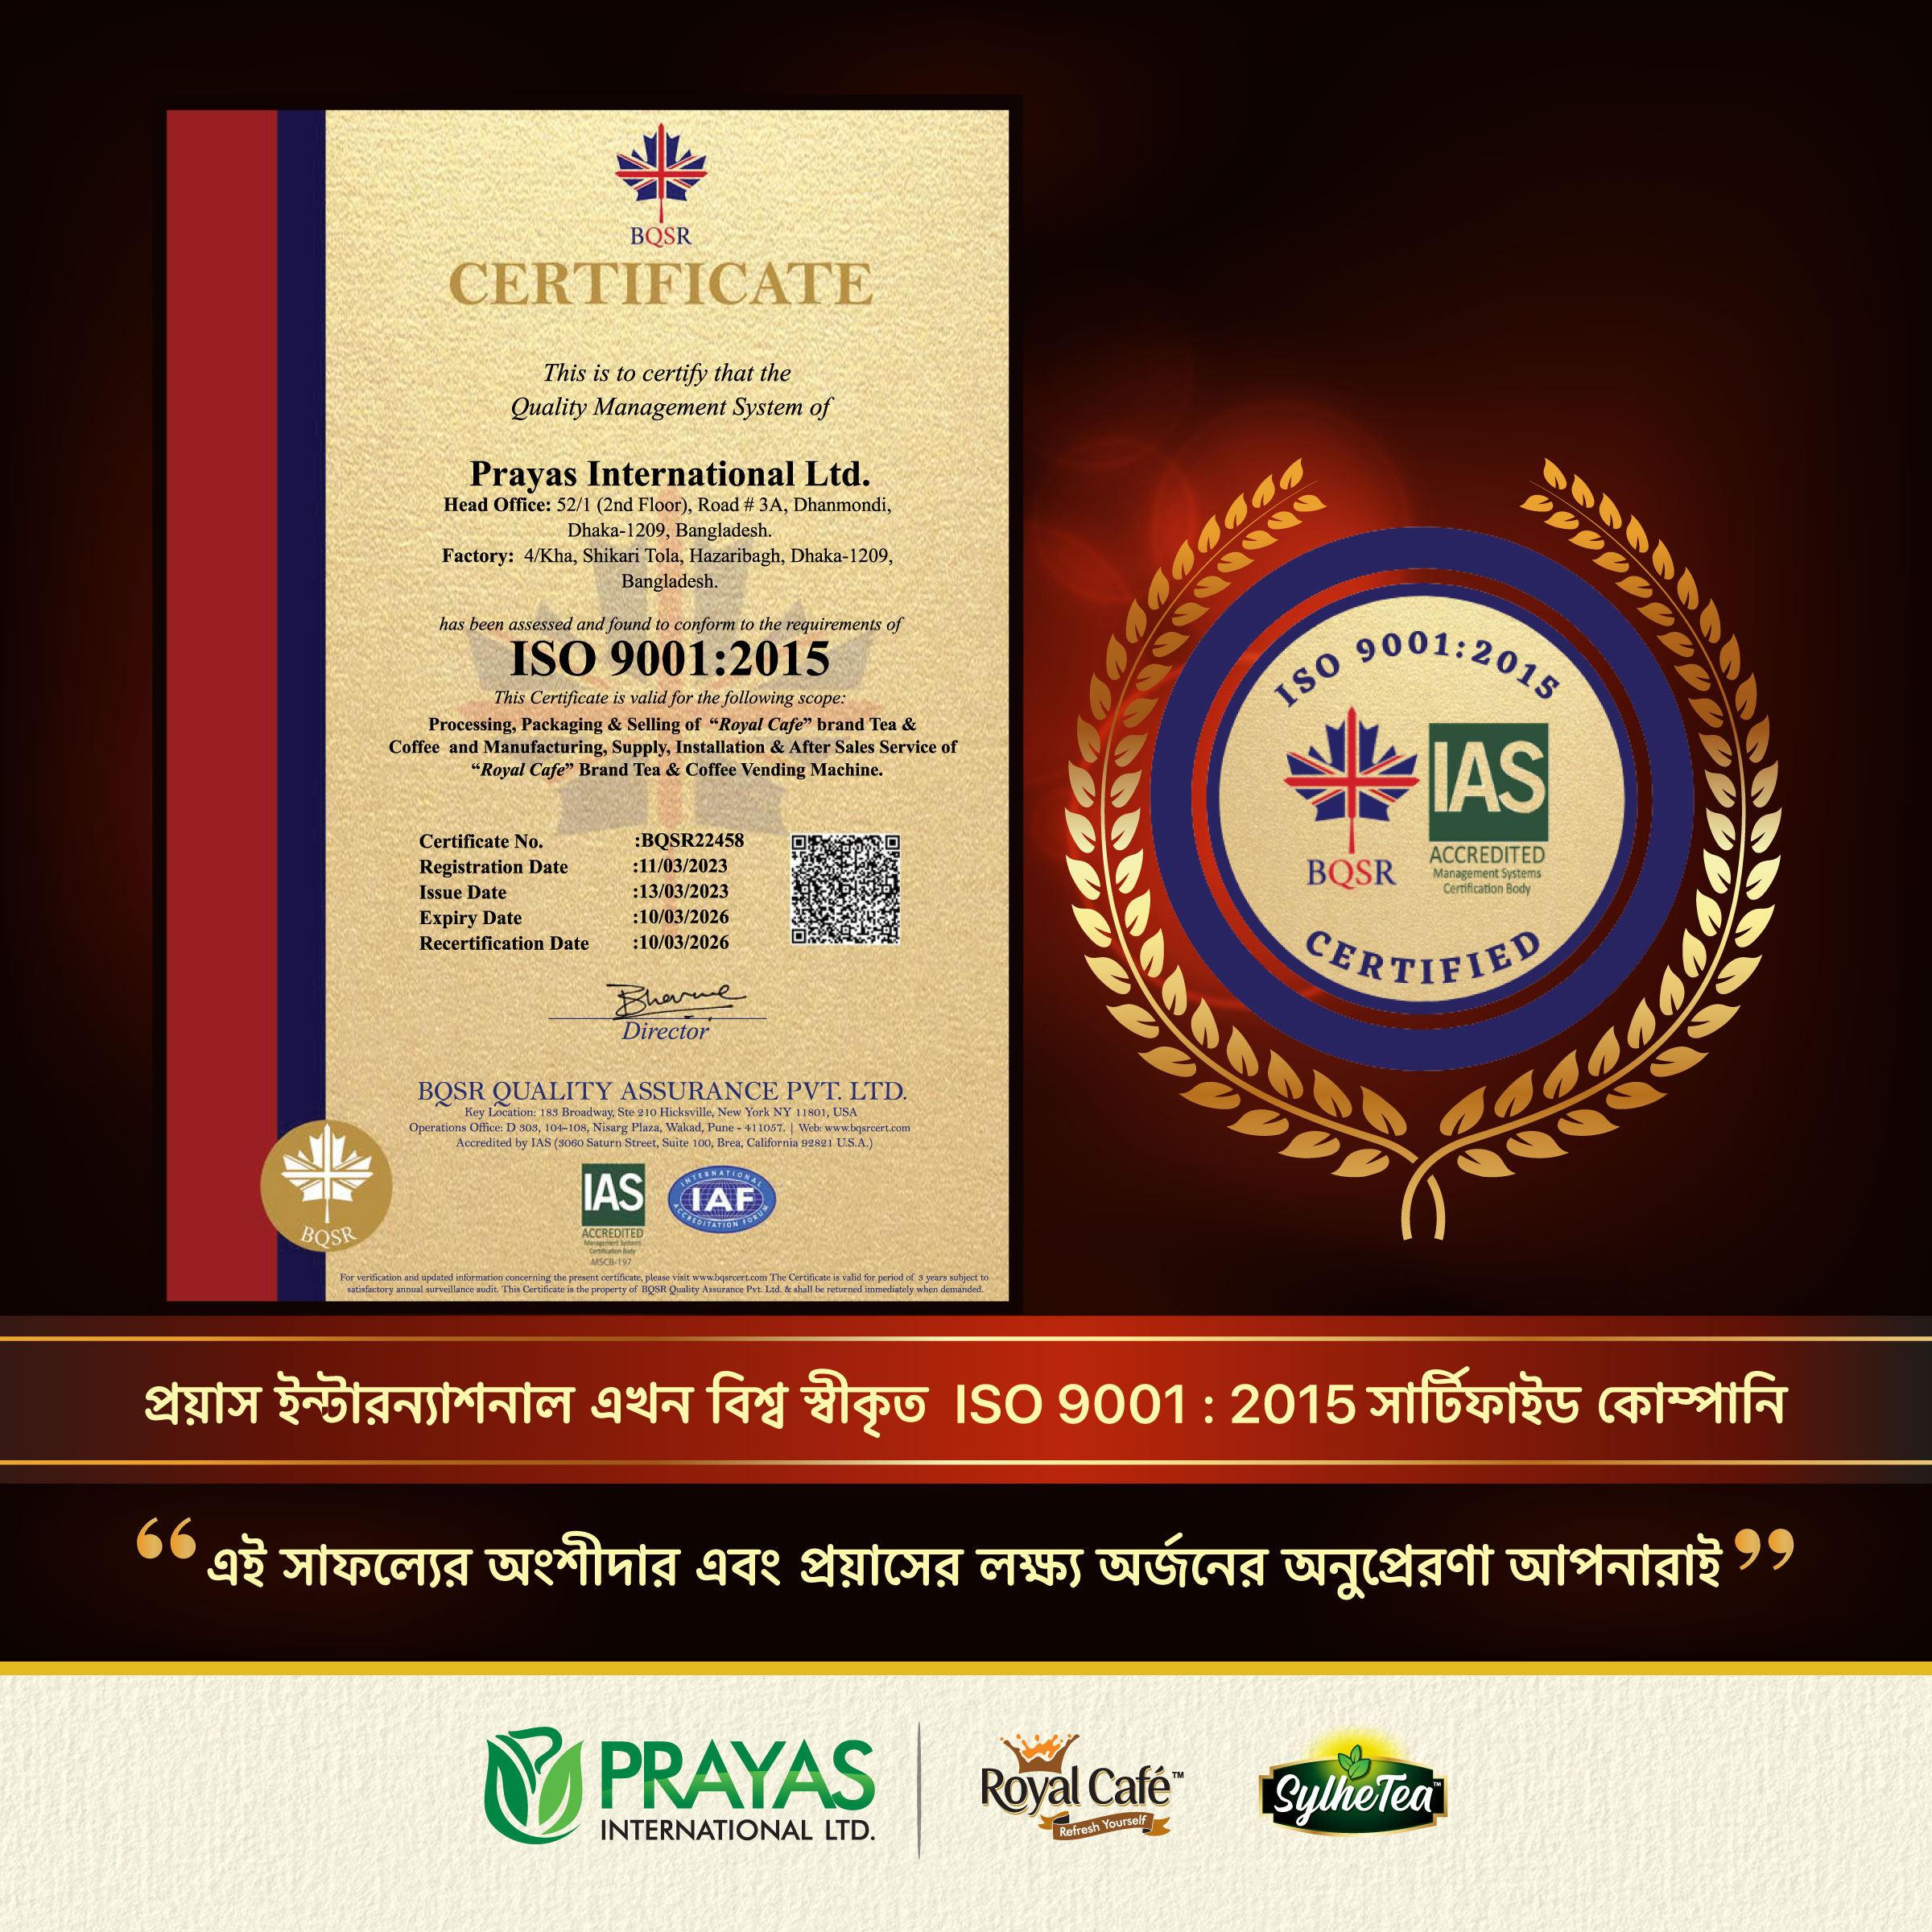 Prayas International has achieved a significant milestone by becoming a globally recognized ISO 9001:2015 certified company.